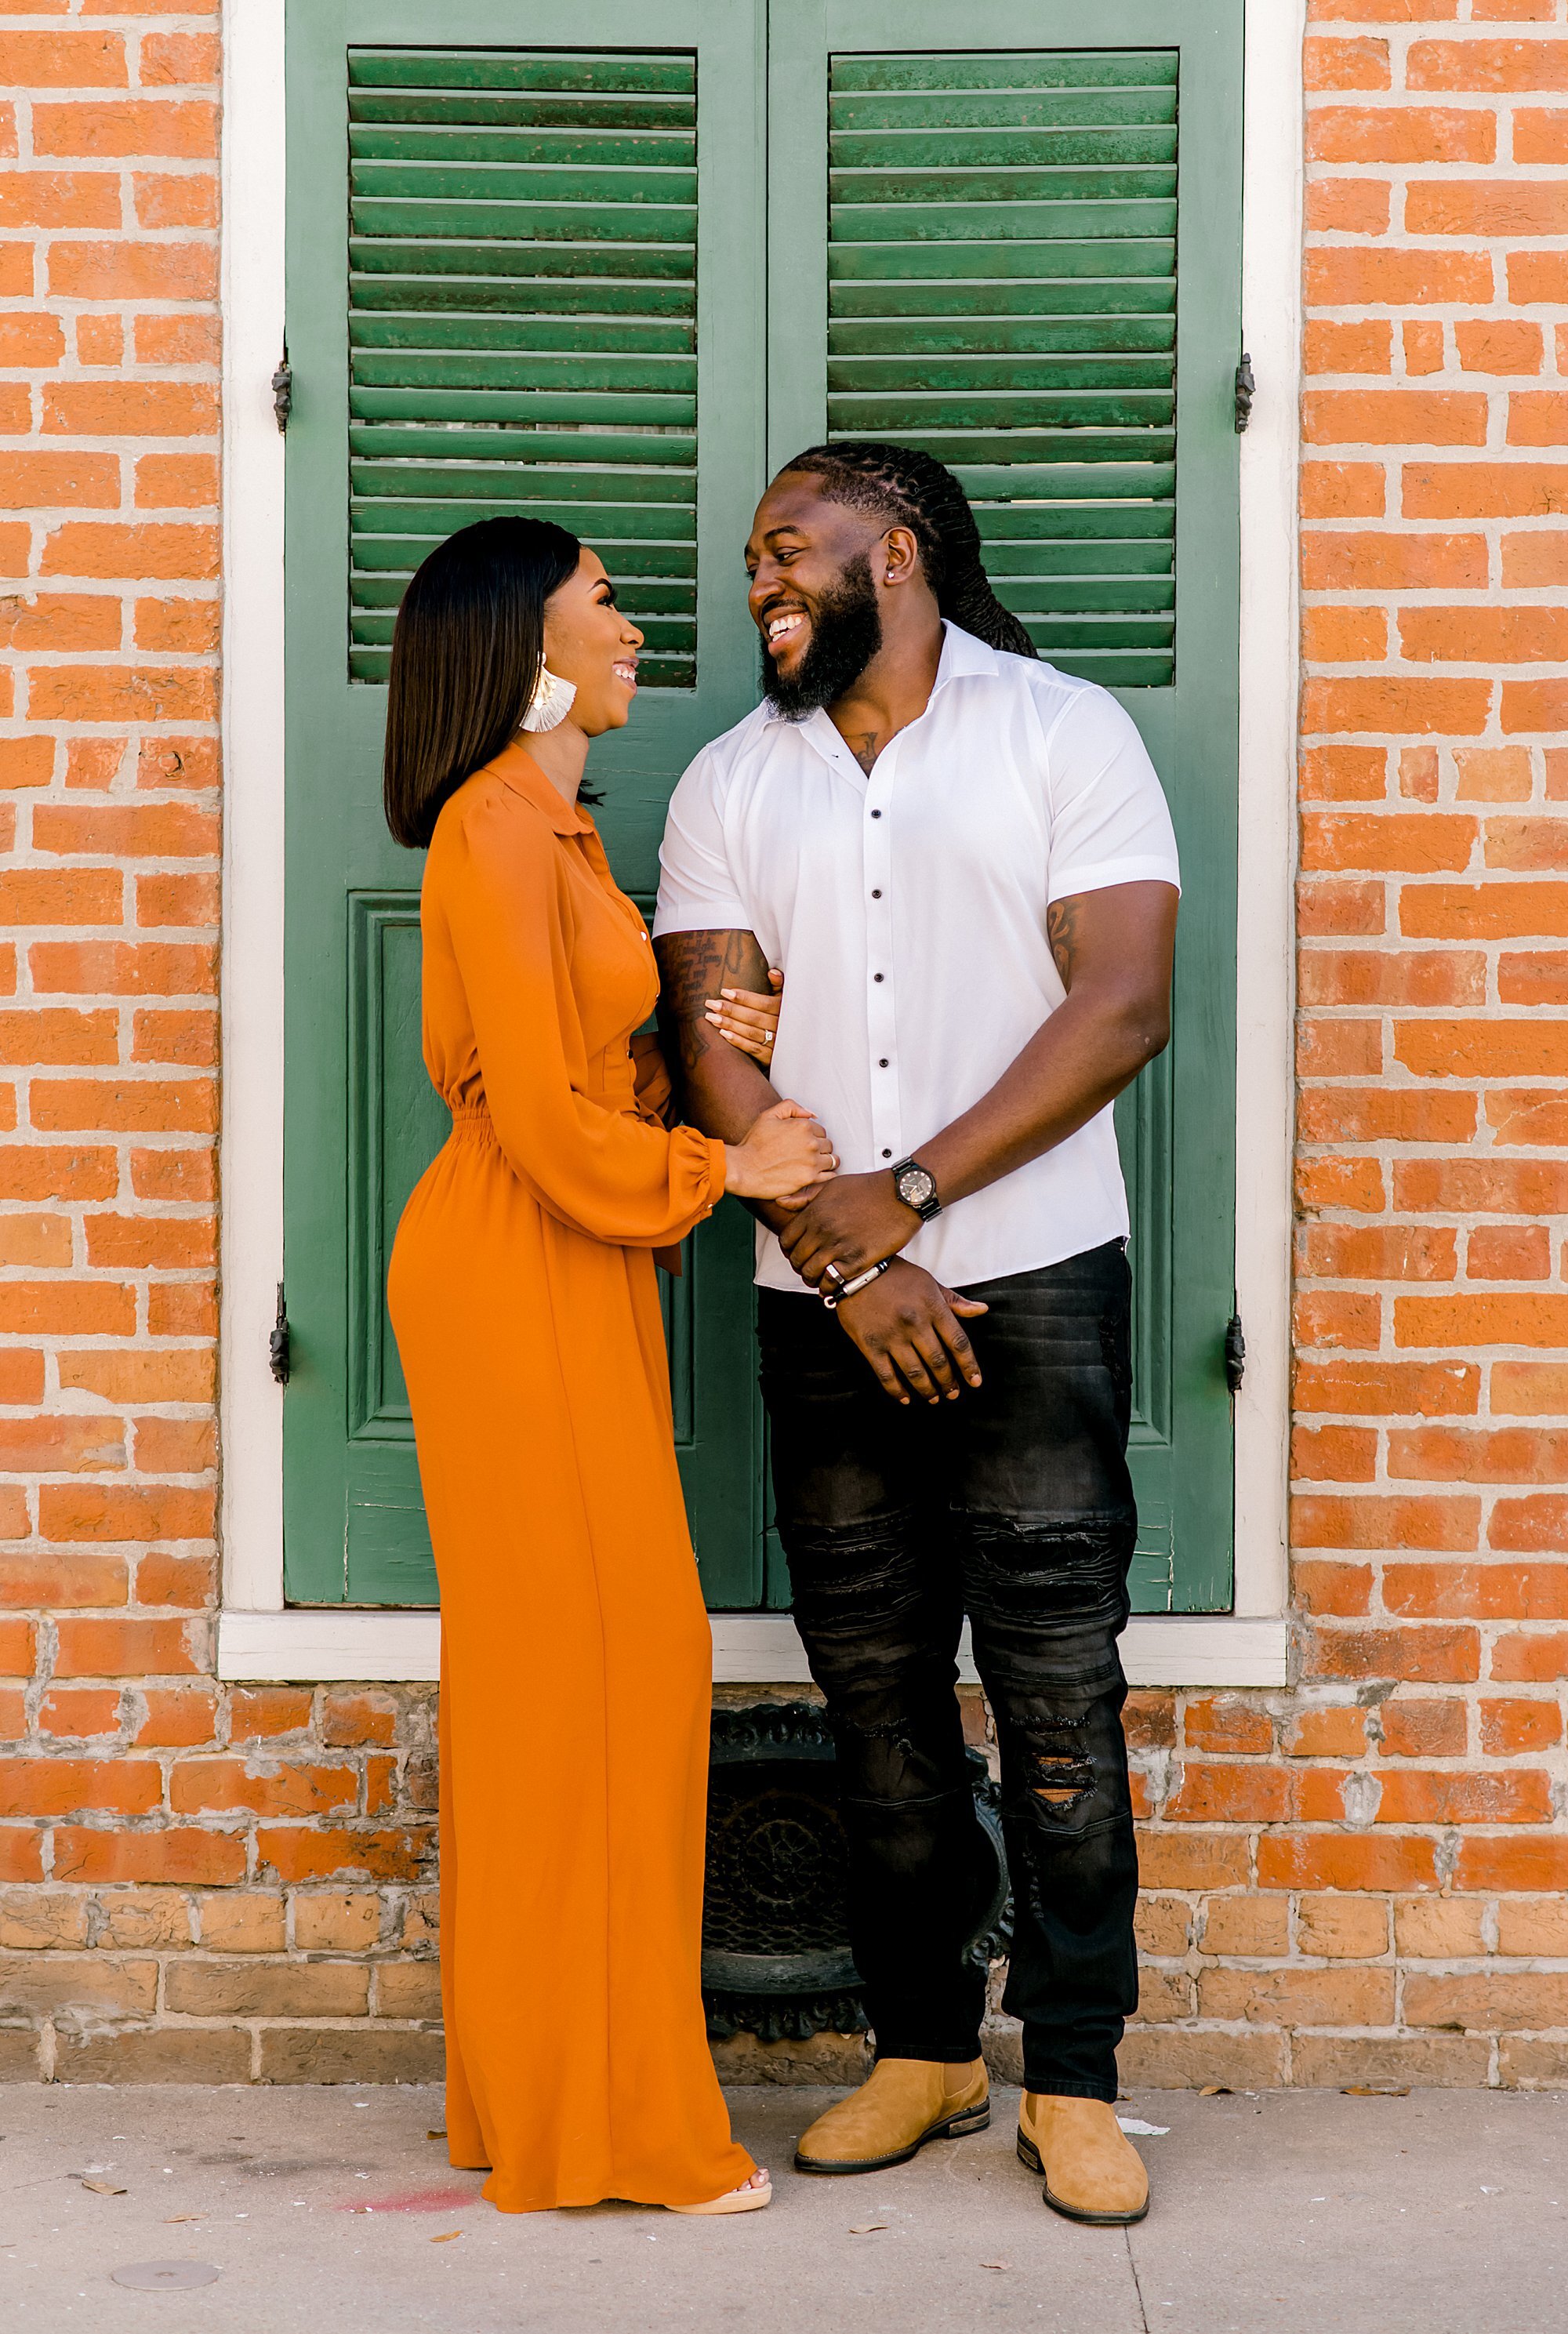 French Quarter Engagement Shoot-New Orleans French Quarter-New Orleans Photographer_0131.jpg